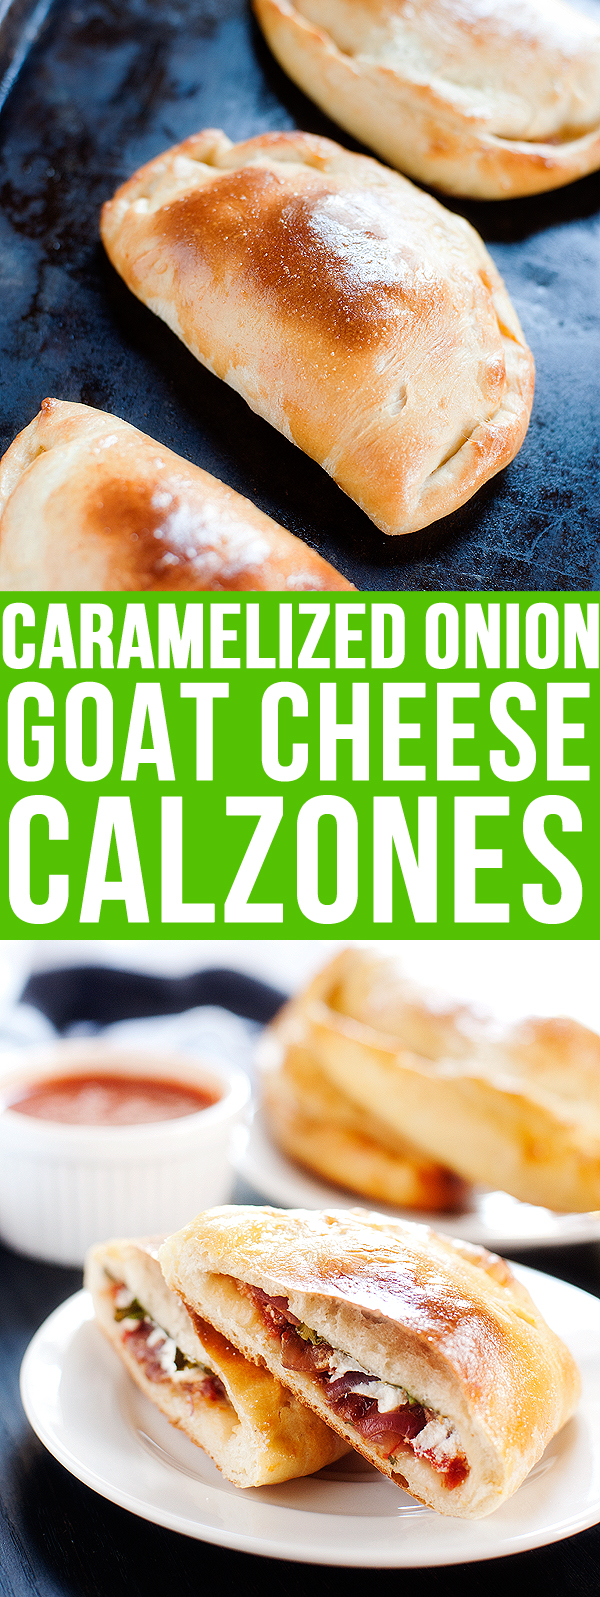 Caramelized Onion Goat Cheese Calzones